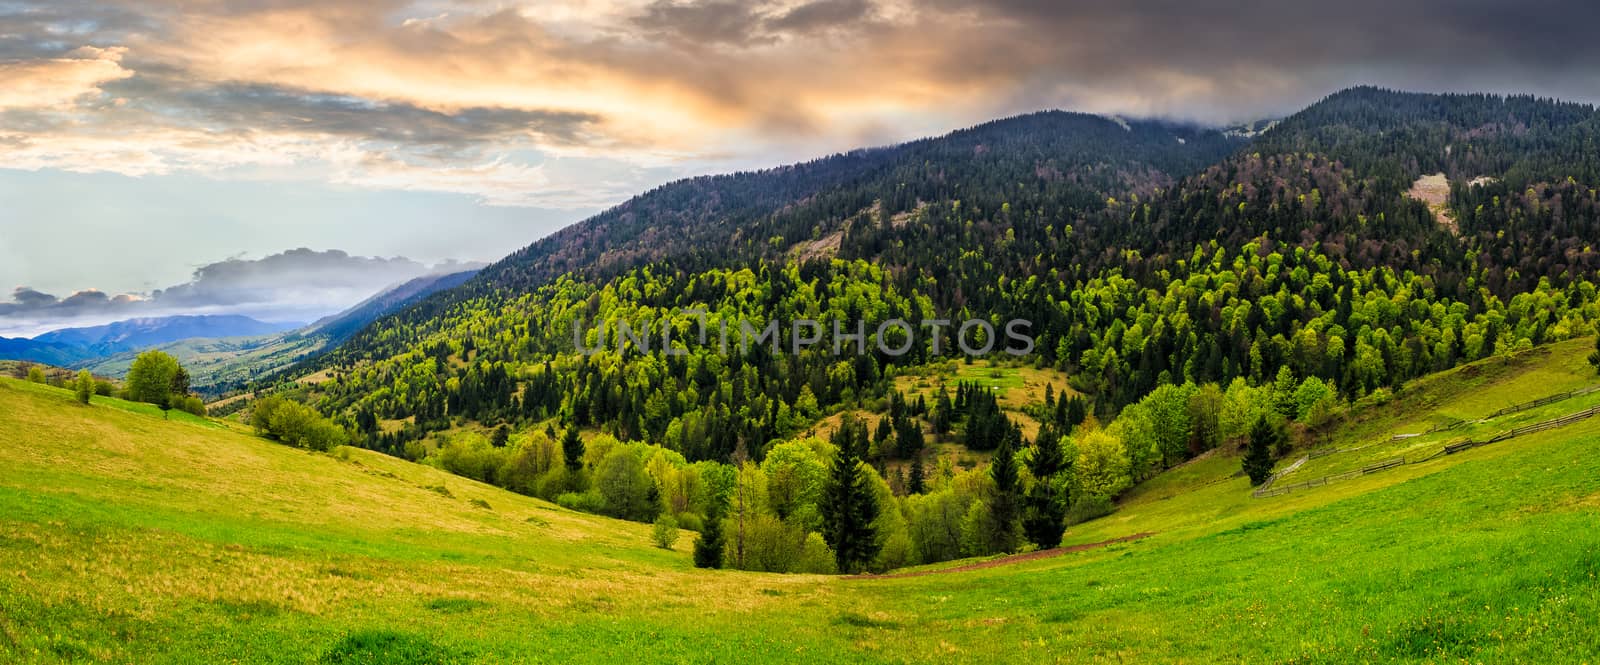 meadow with trees in mountains by Pellinni